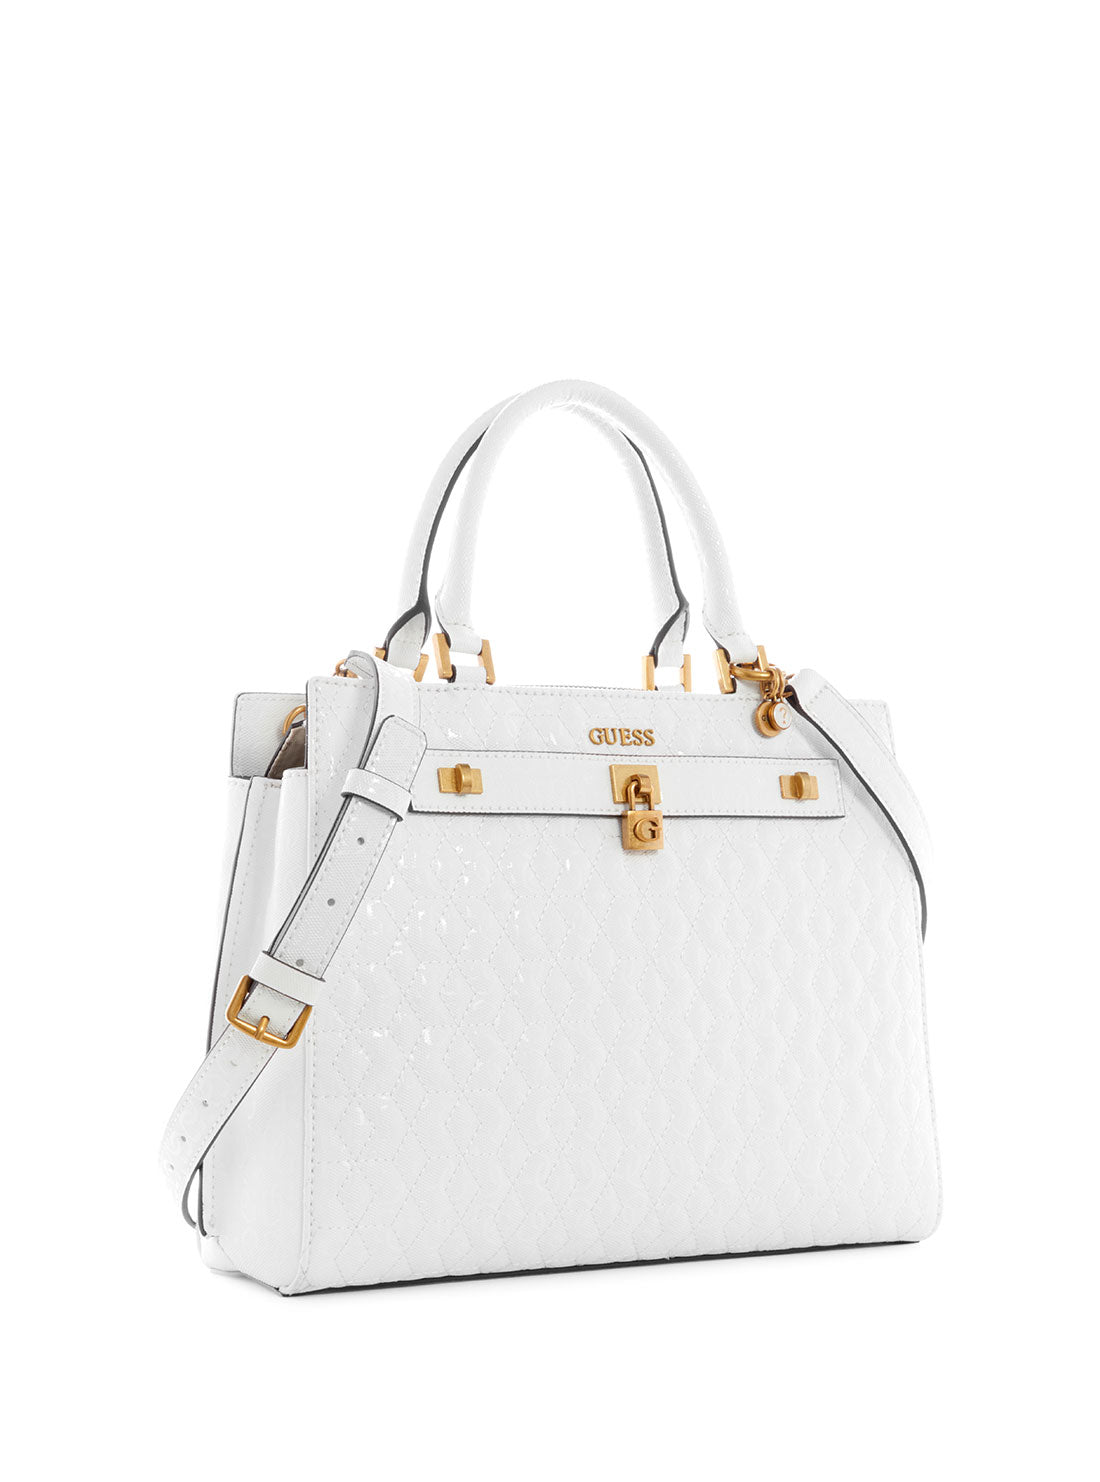 GUESS Womens White Isidora Girlfriend Satchel Bag GB854706 Front Side View